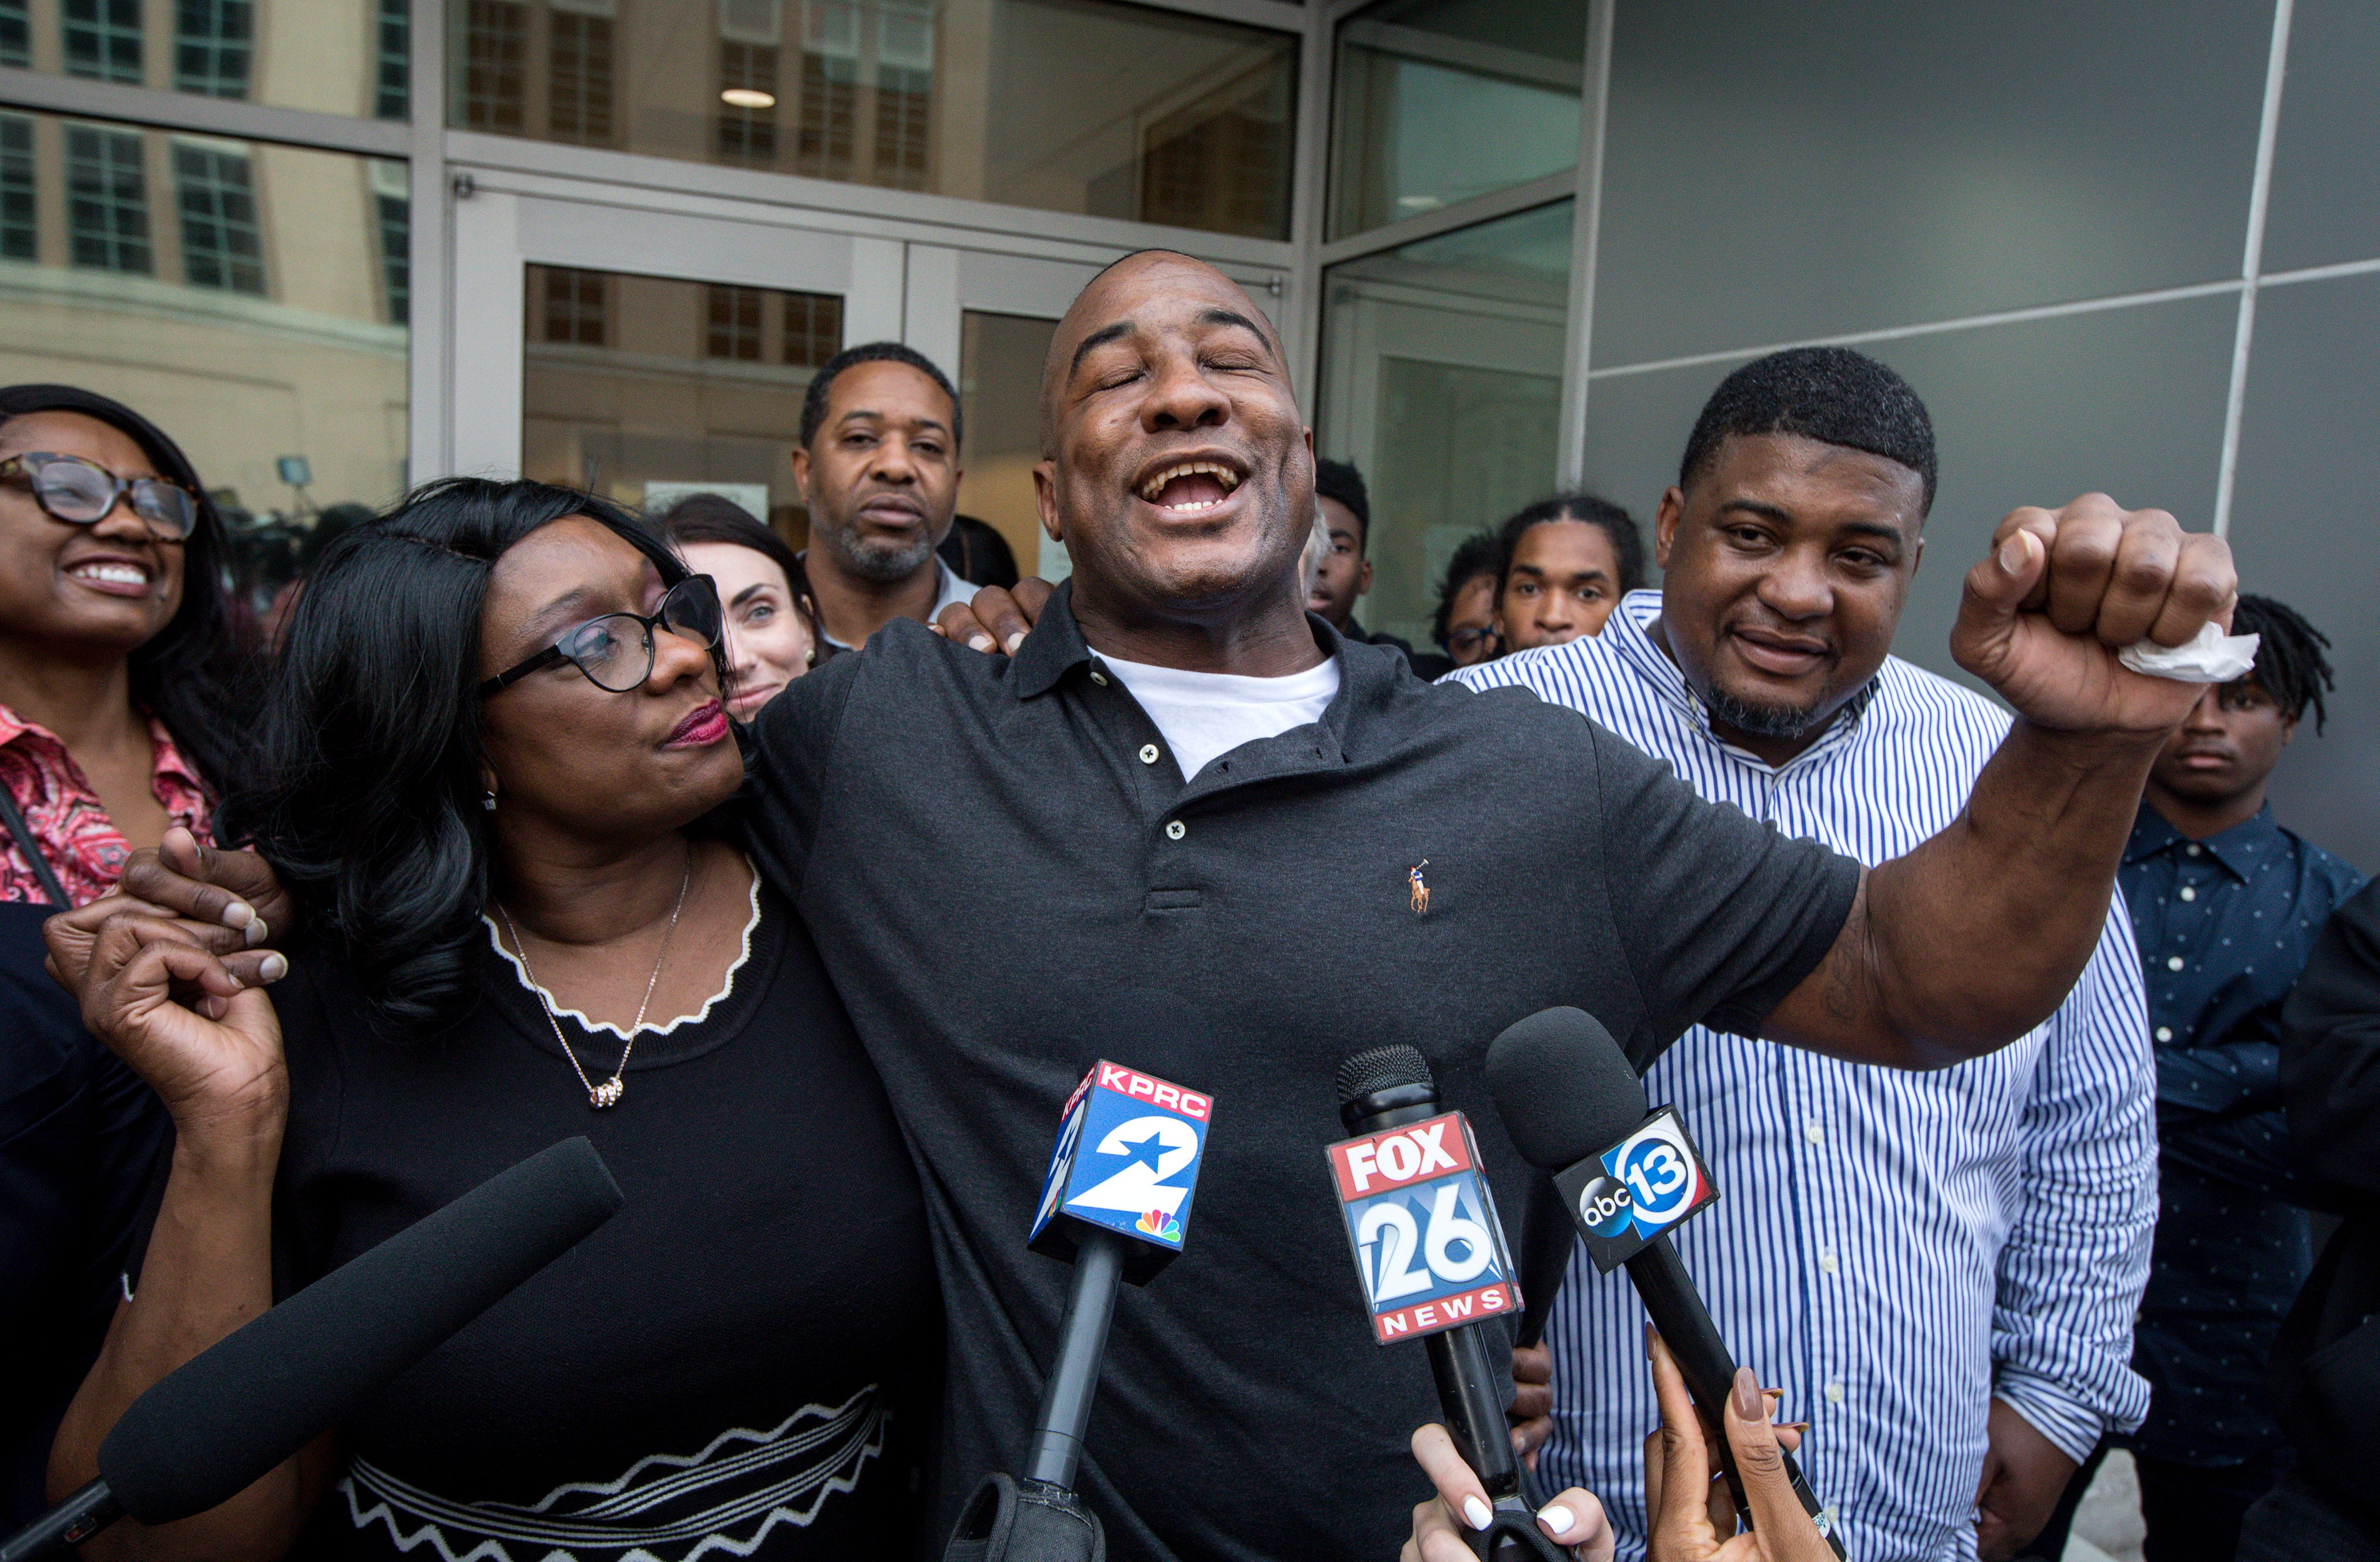 In this Nov. 26, 2019 file photo, Lydell Grant, centre, his mother, Donna Poe, second from left, and brother Alonzo Poe, right, talk to reporters after Grant’s release on bond in Houston